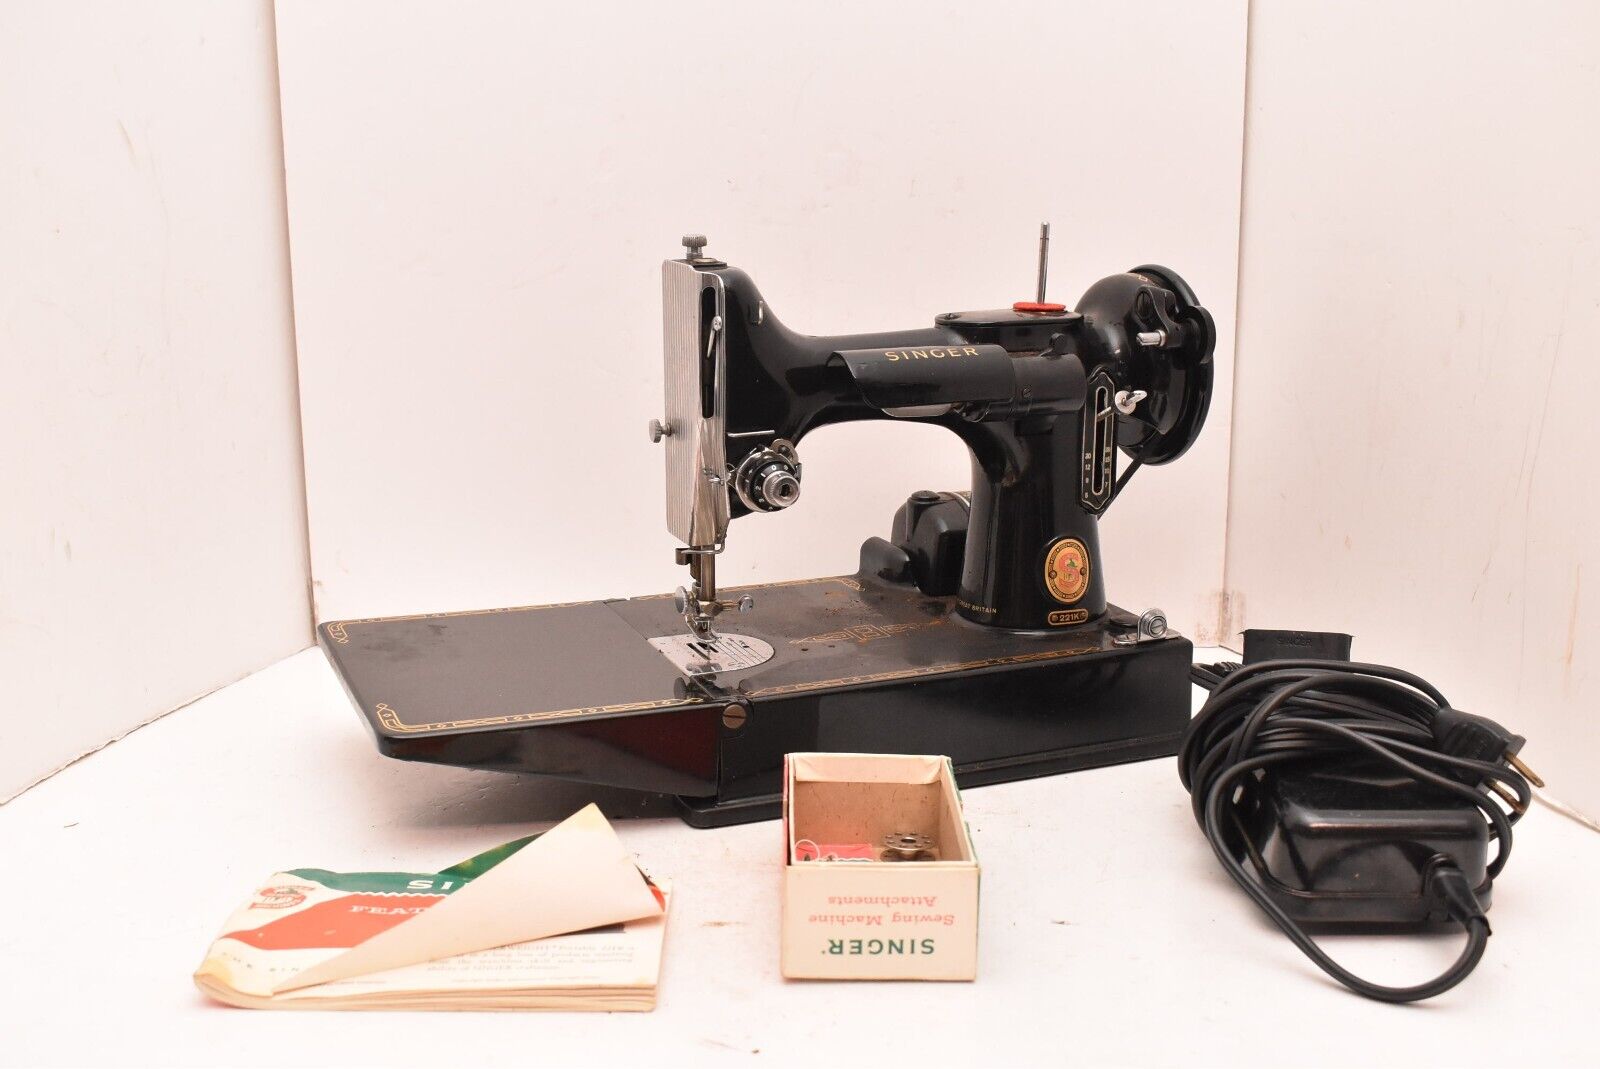 1961 SINGER 221 FEATHERWEIGHT SEWING MACHINE -With Case Vintage